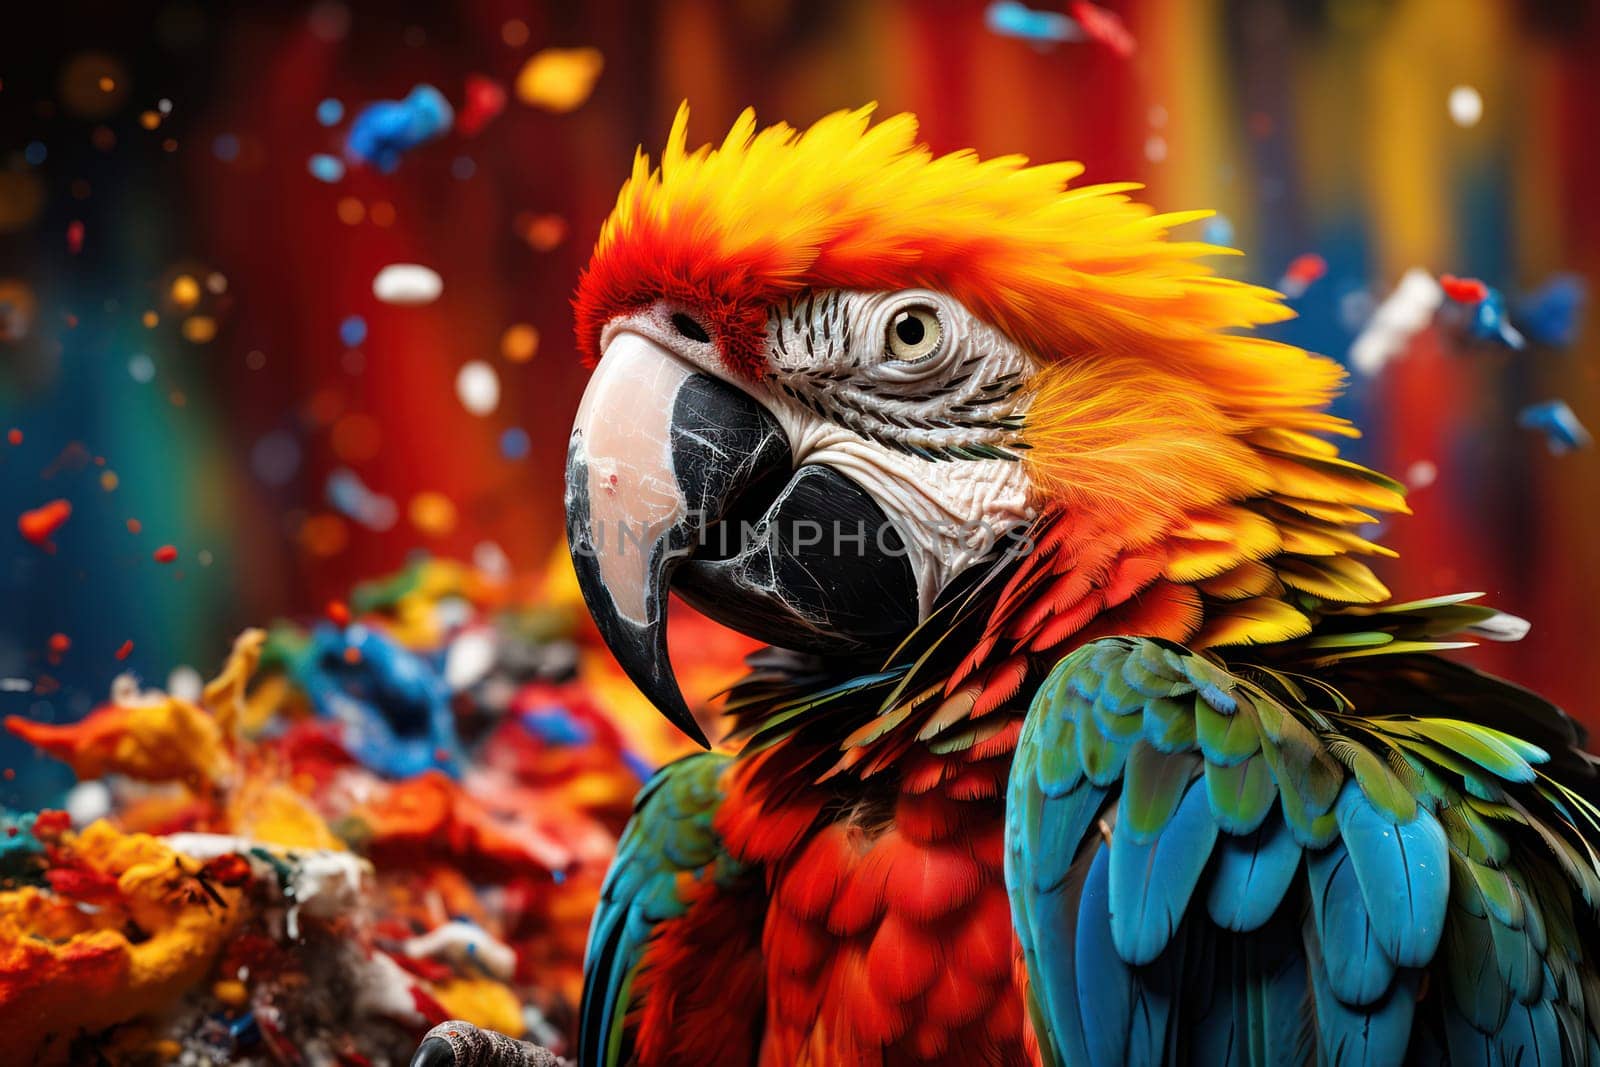 Vibrant Feathers: A Colorful Macaw Parrot with Vivid Plumage and Stunning Blue, Green, and Yellow Feathers - Portrait of a Beautiful Exotic Bird in the Tropical Rainforest